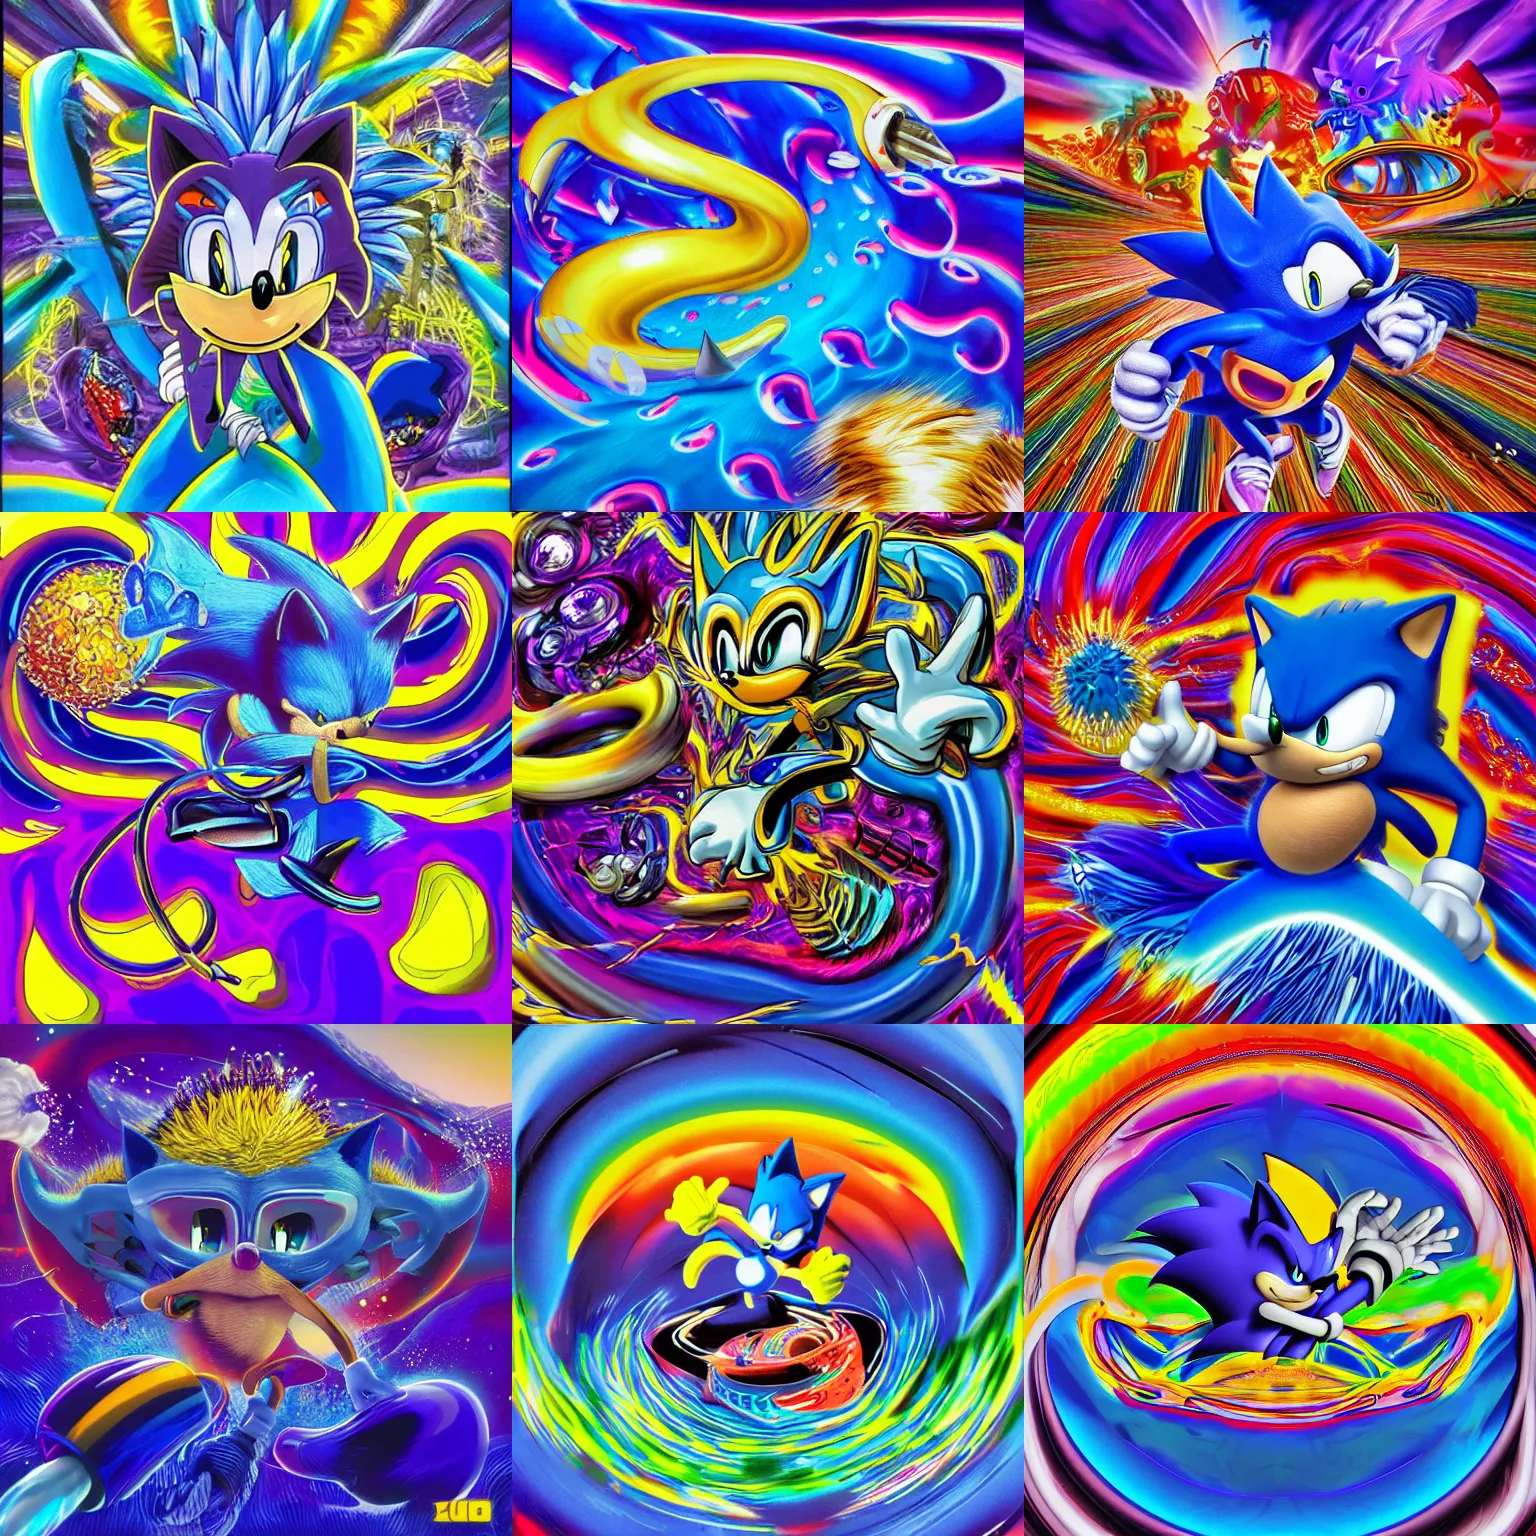 Prompt: surreal, sonic hedgehog, sharp, lowbrow, detailed professional, high quality airbrush art MGMT album cover of a liquid dissolving LSD DMT blue sonic the hedgehog surfing through cyberspace, purple rings background, rings, 1990s 1992 acid house techno Sega Genesis video game album cover